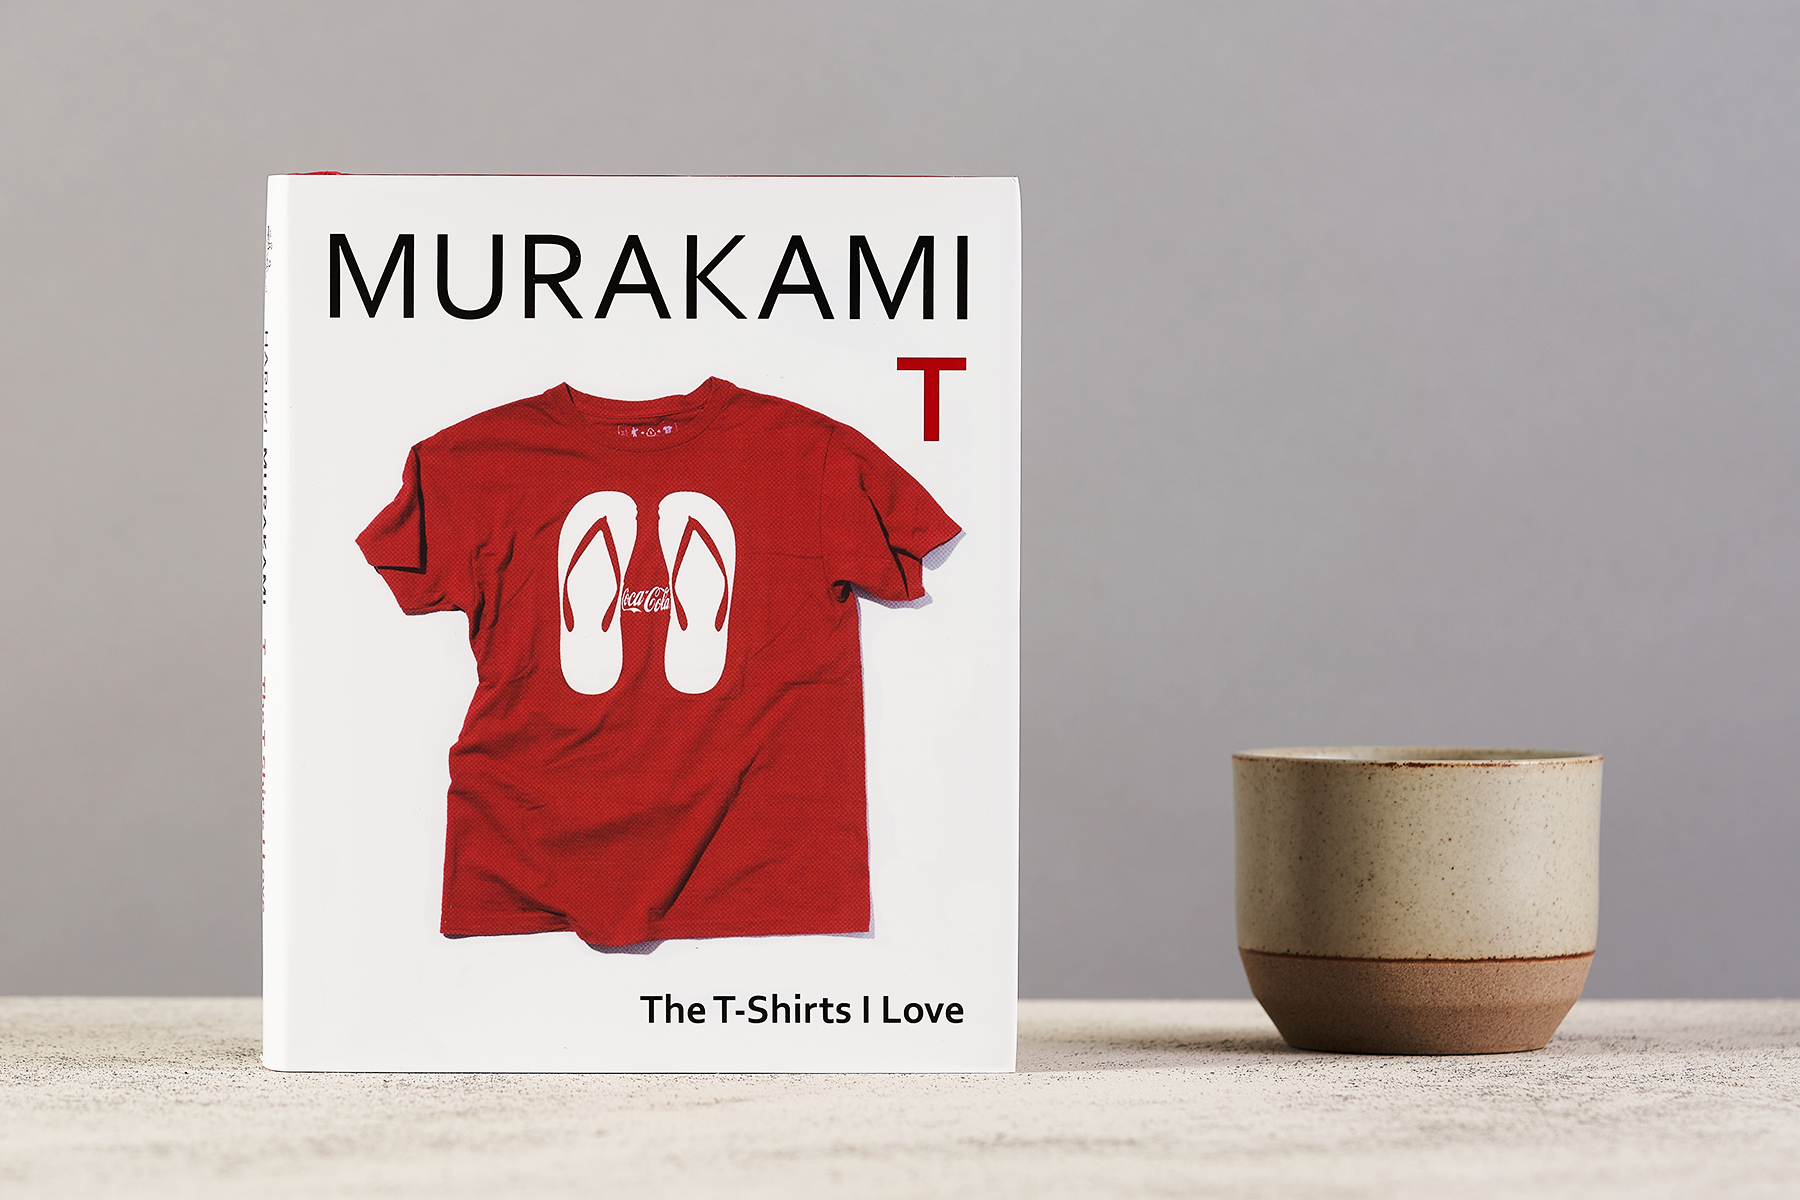 A copy of Murakami T sits next to a cup of tea